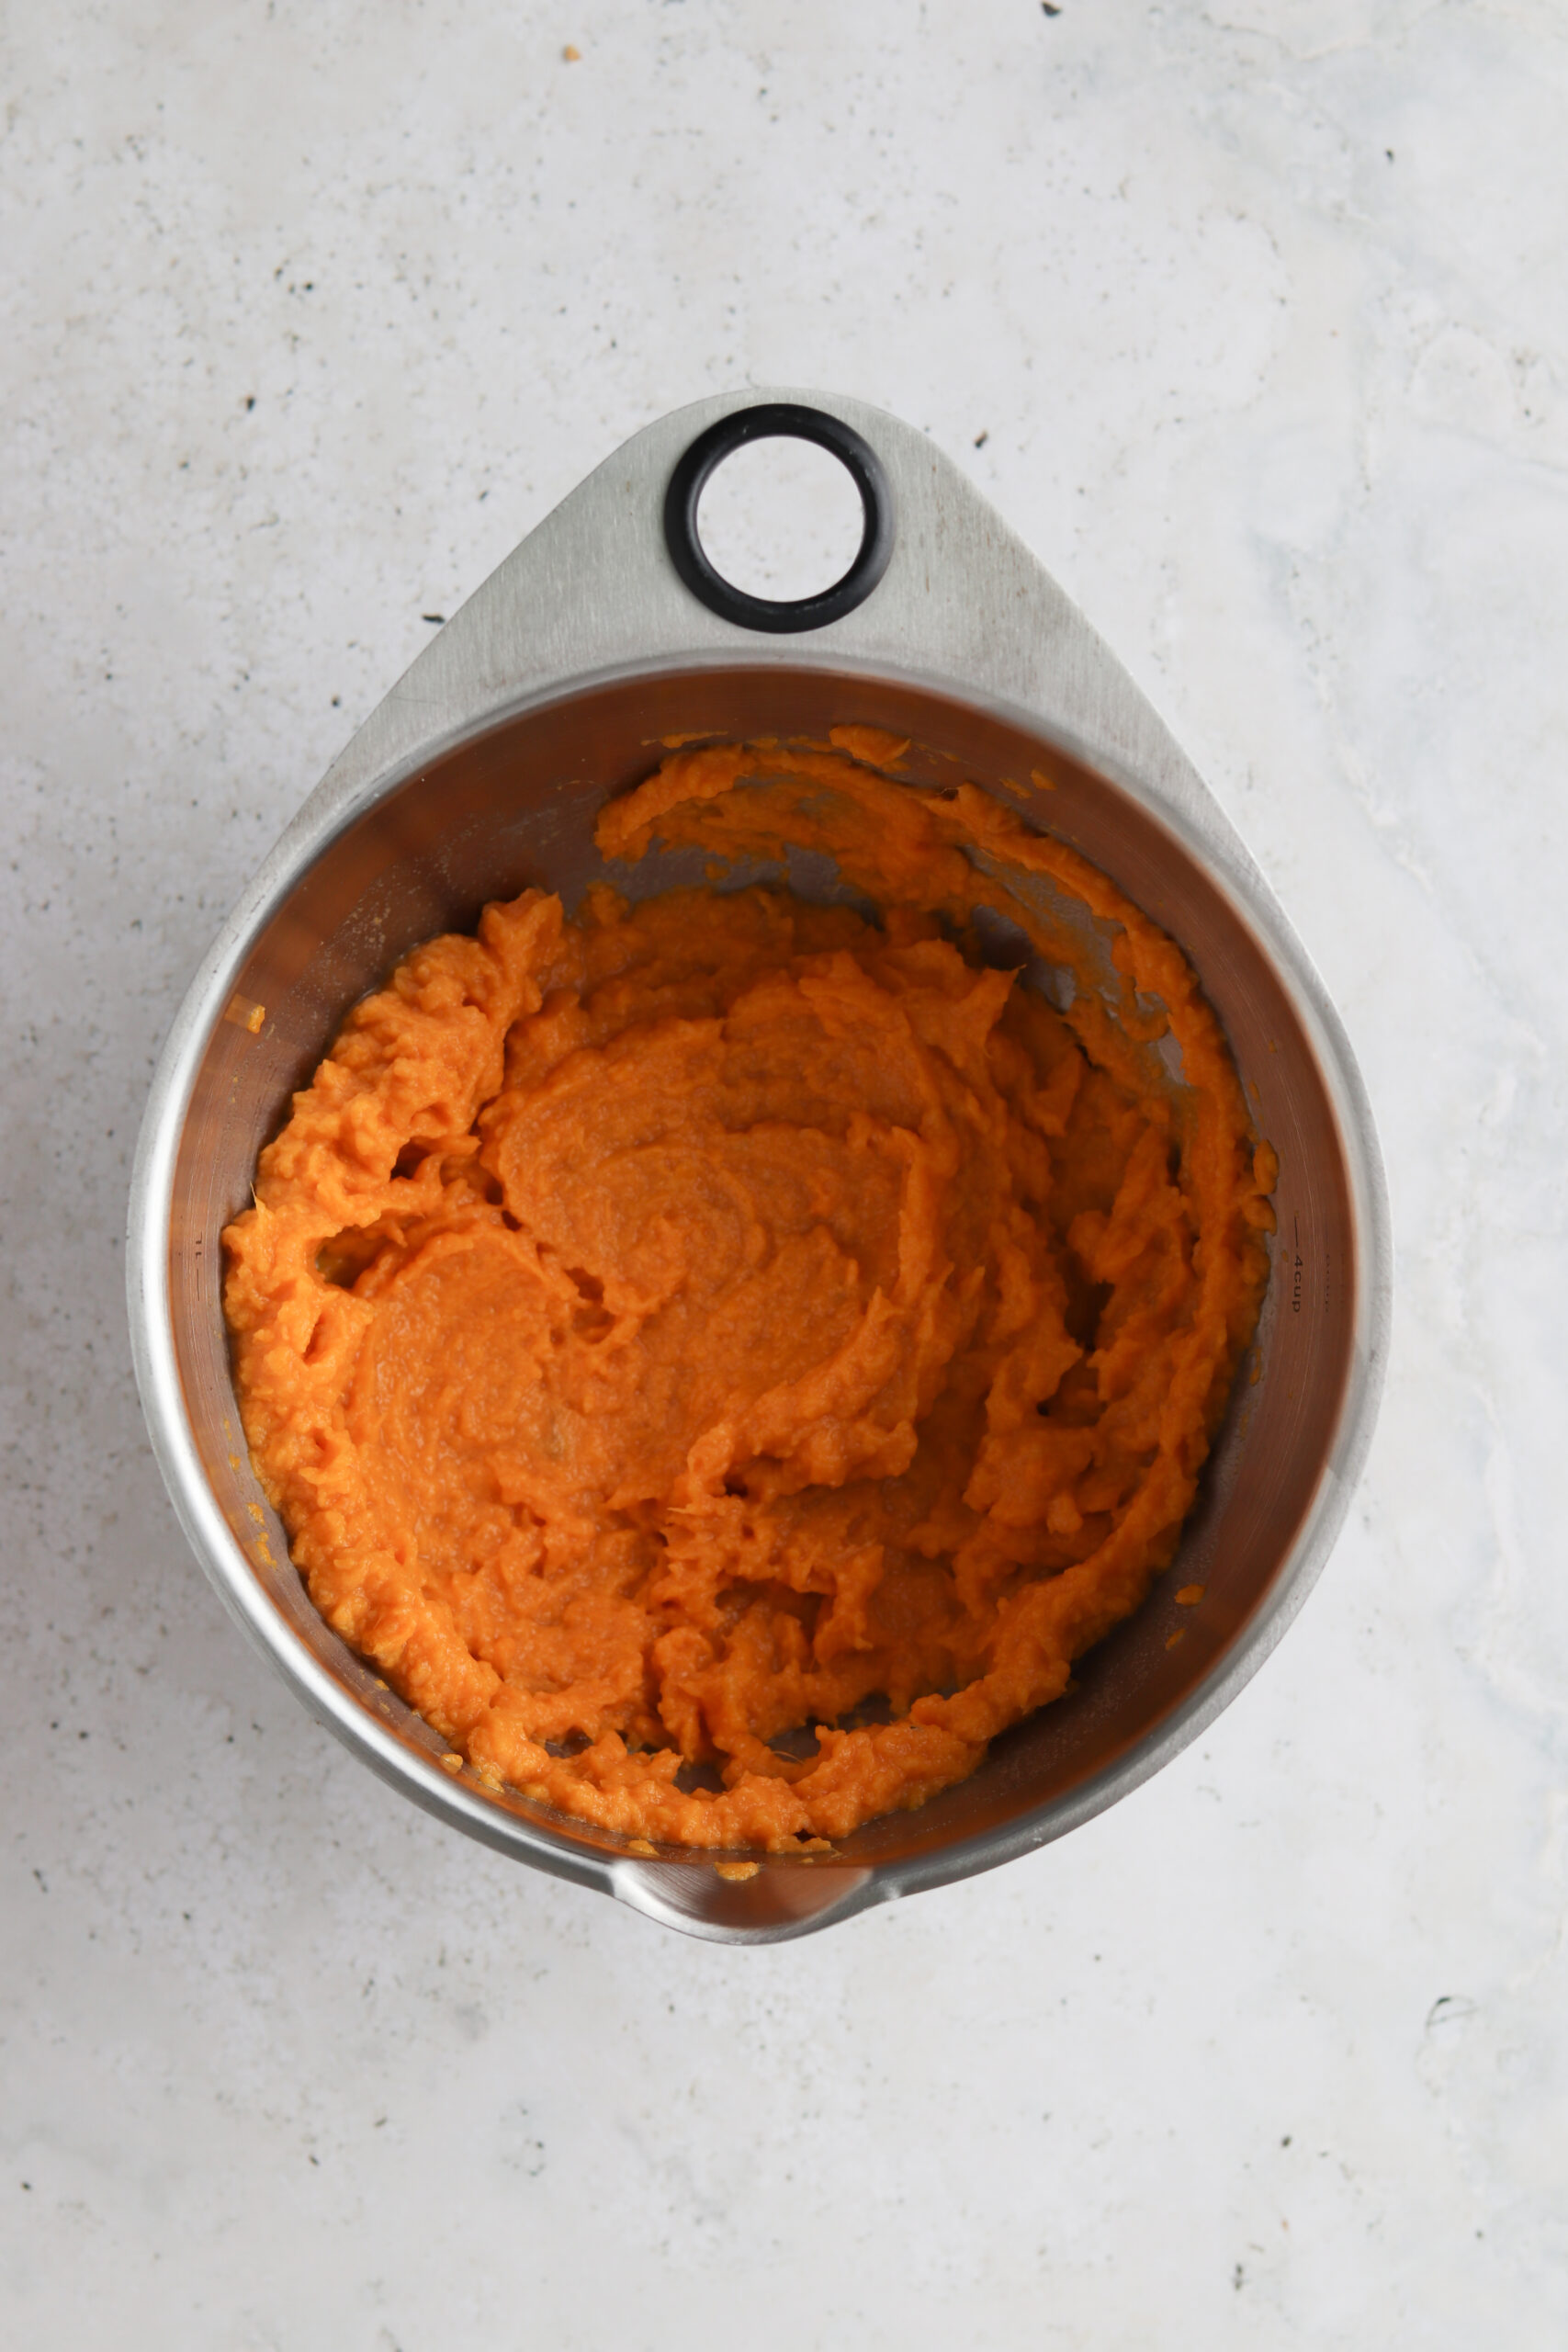 Sweet potato mash with olive oil, sea salt and pepper in a stainless steel bowl.